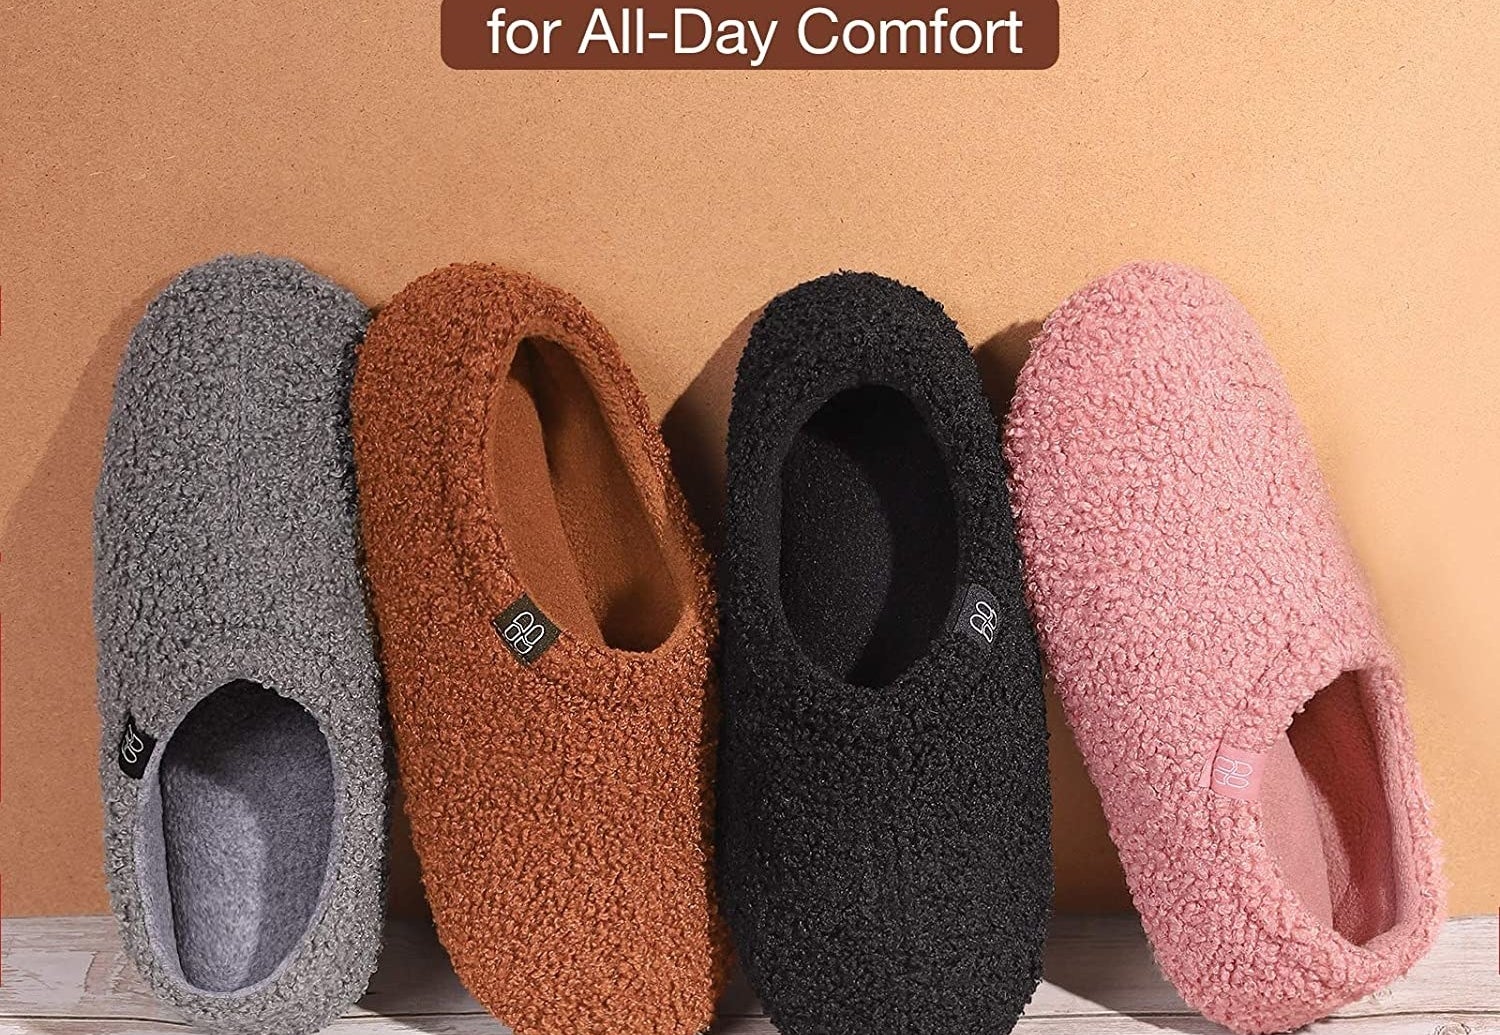 four pairs of different colored fuzzy slippers